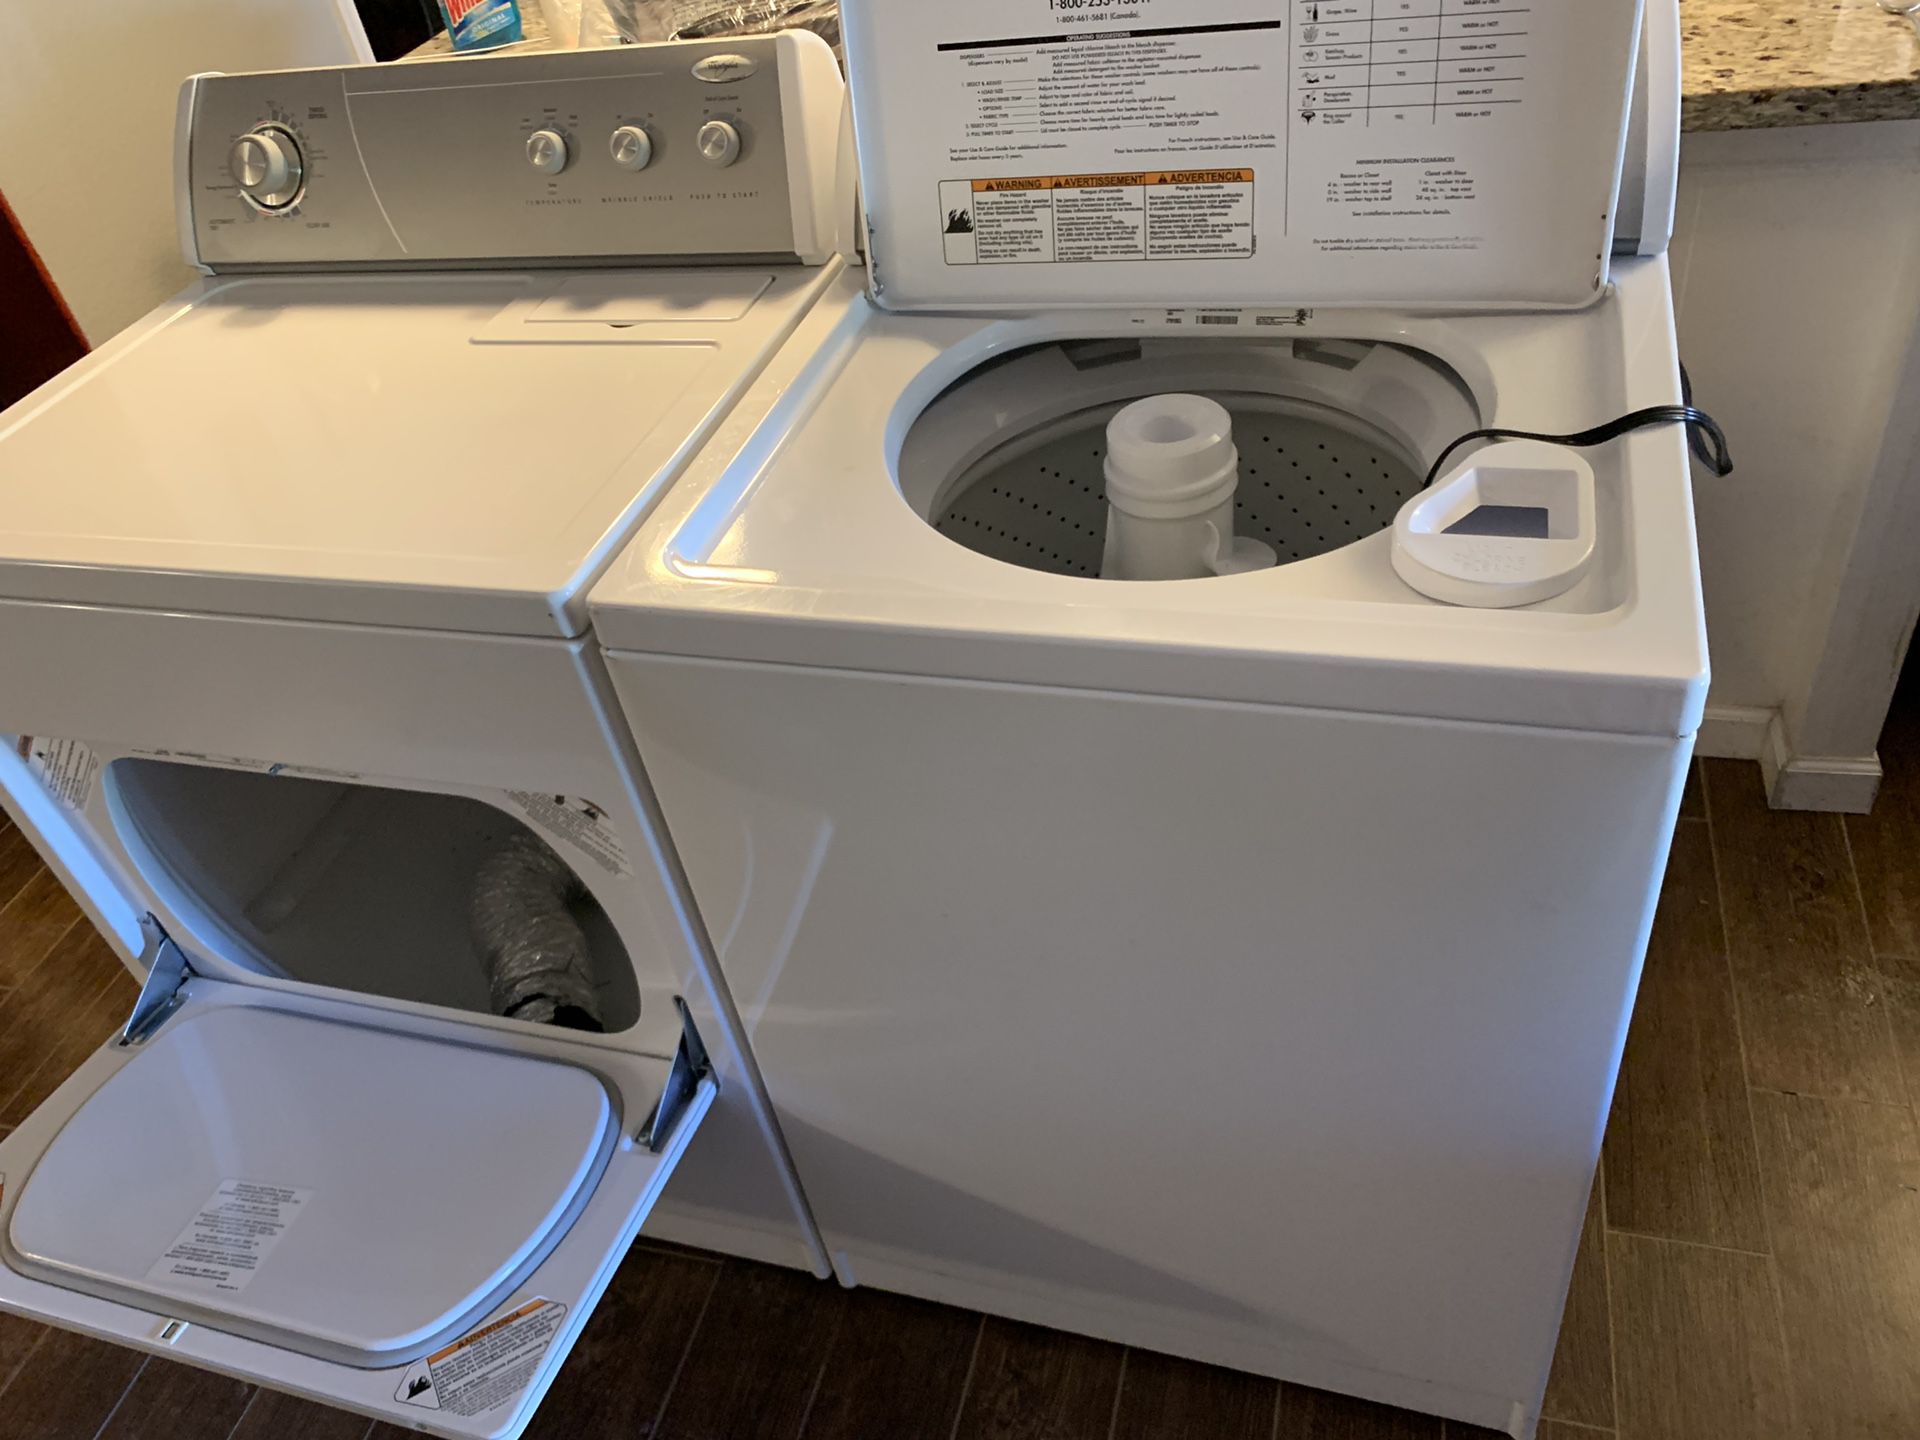 Whirlpool washer and gas dryer